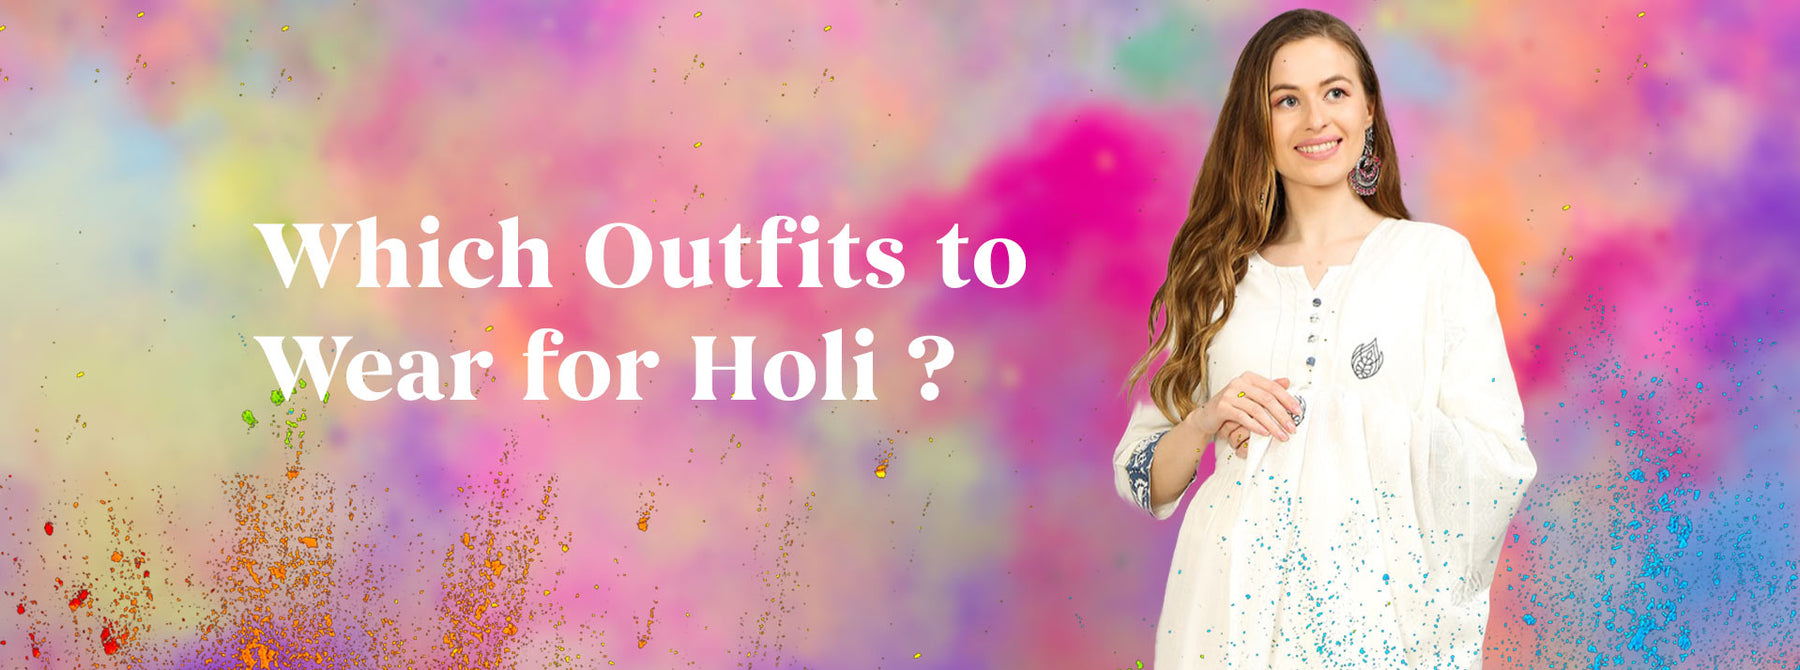 Which Outfits to Wear for Holi?